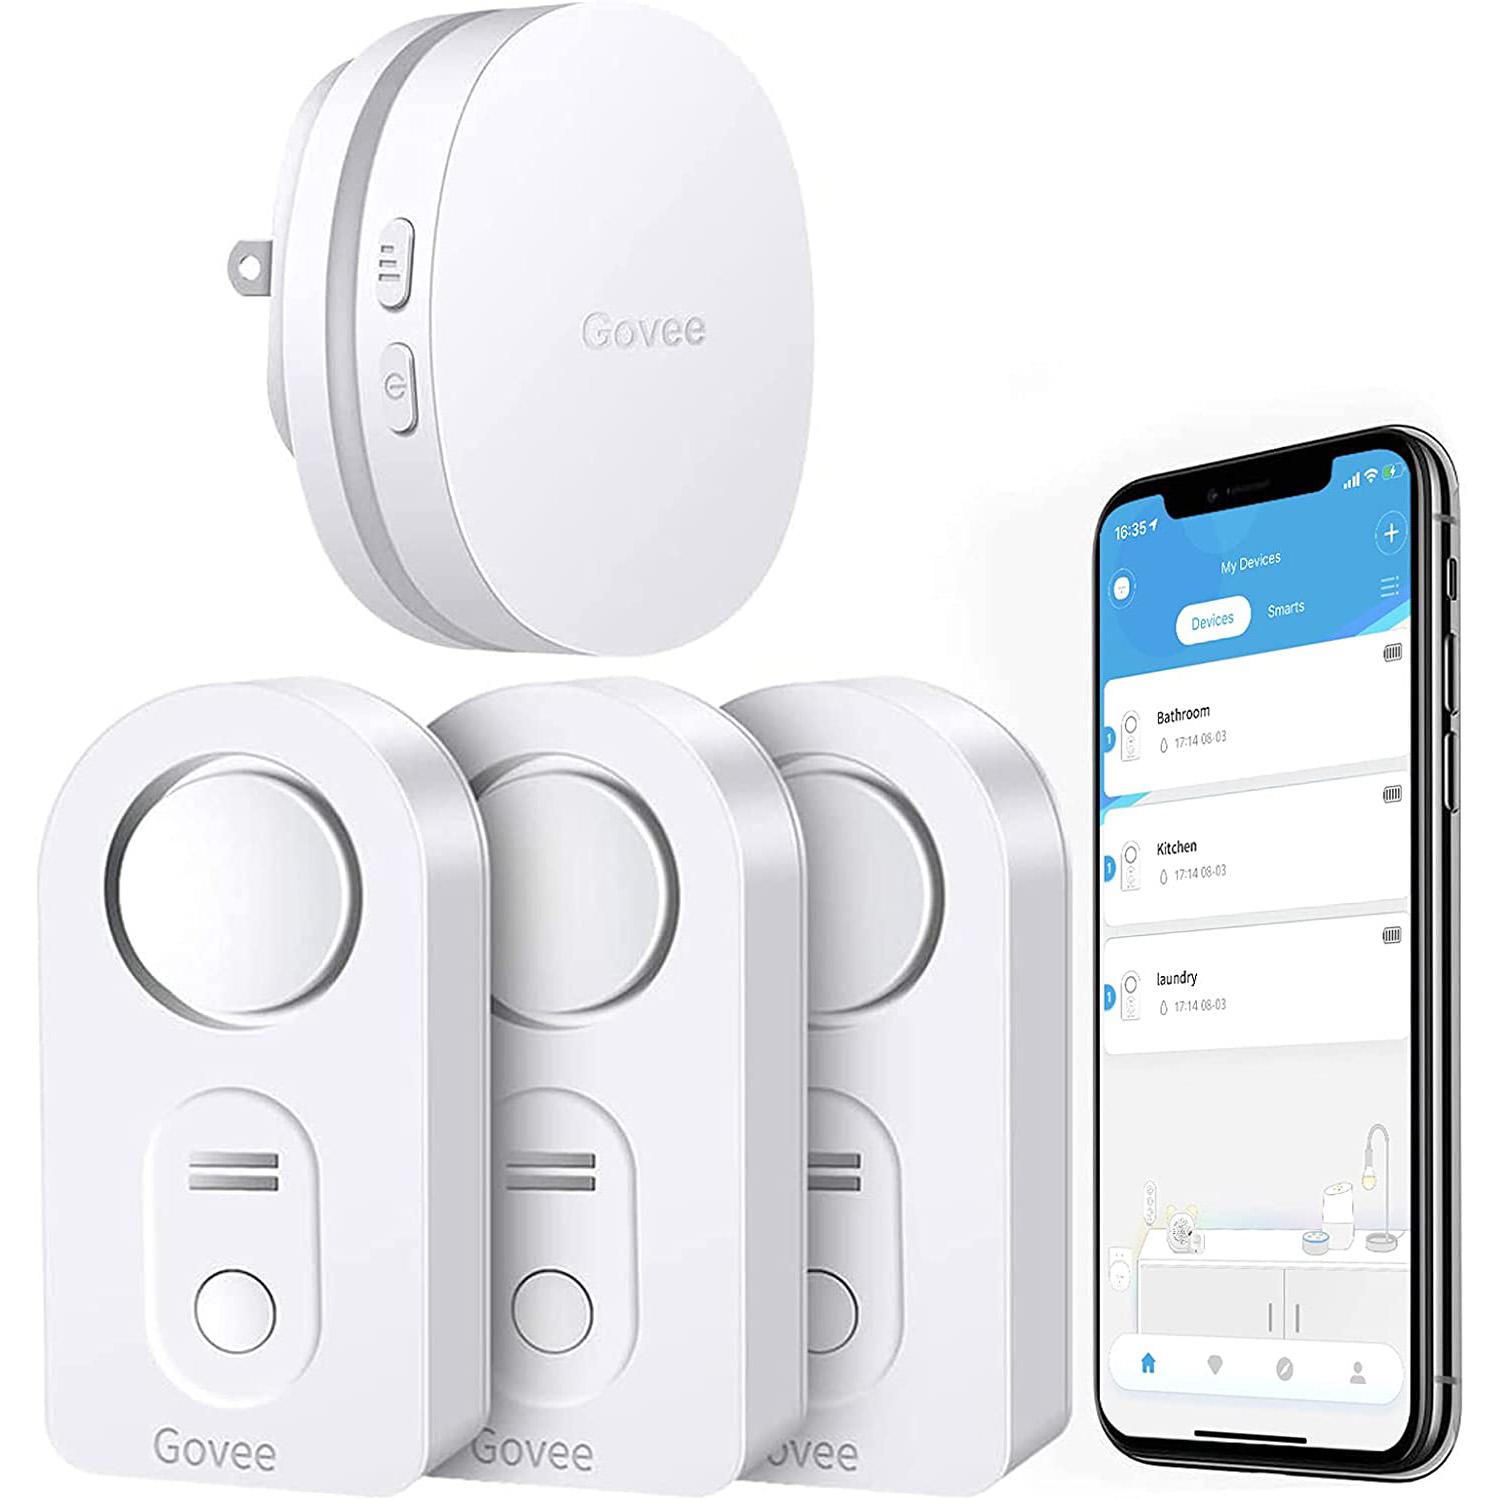 Govee Wi-Fi Water Sensor 3 Pack for $29.99 Shipped